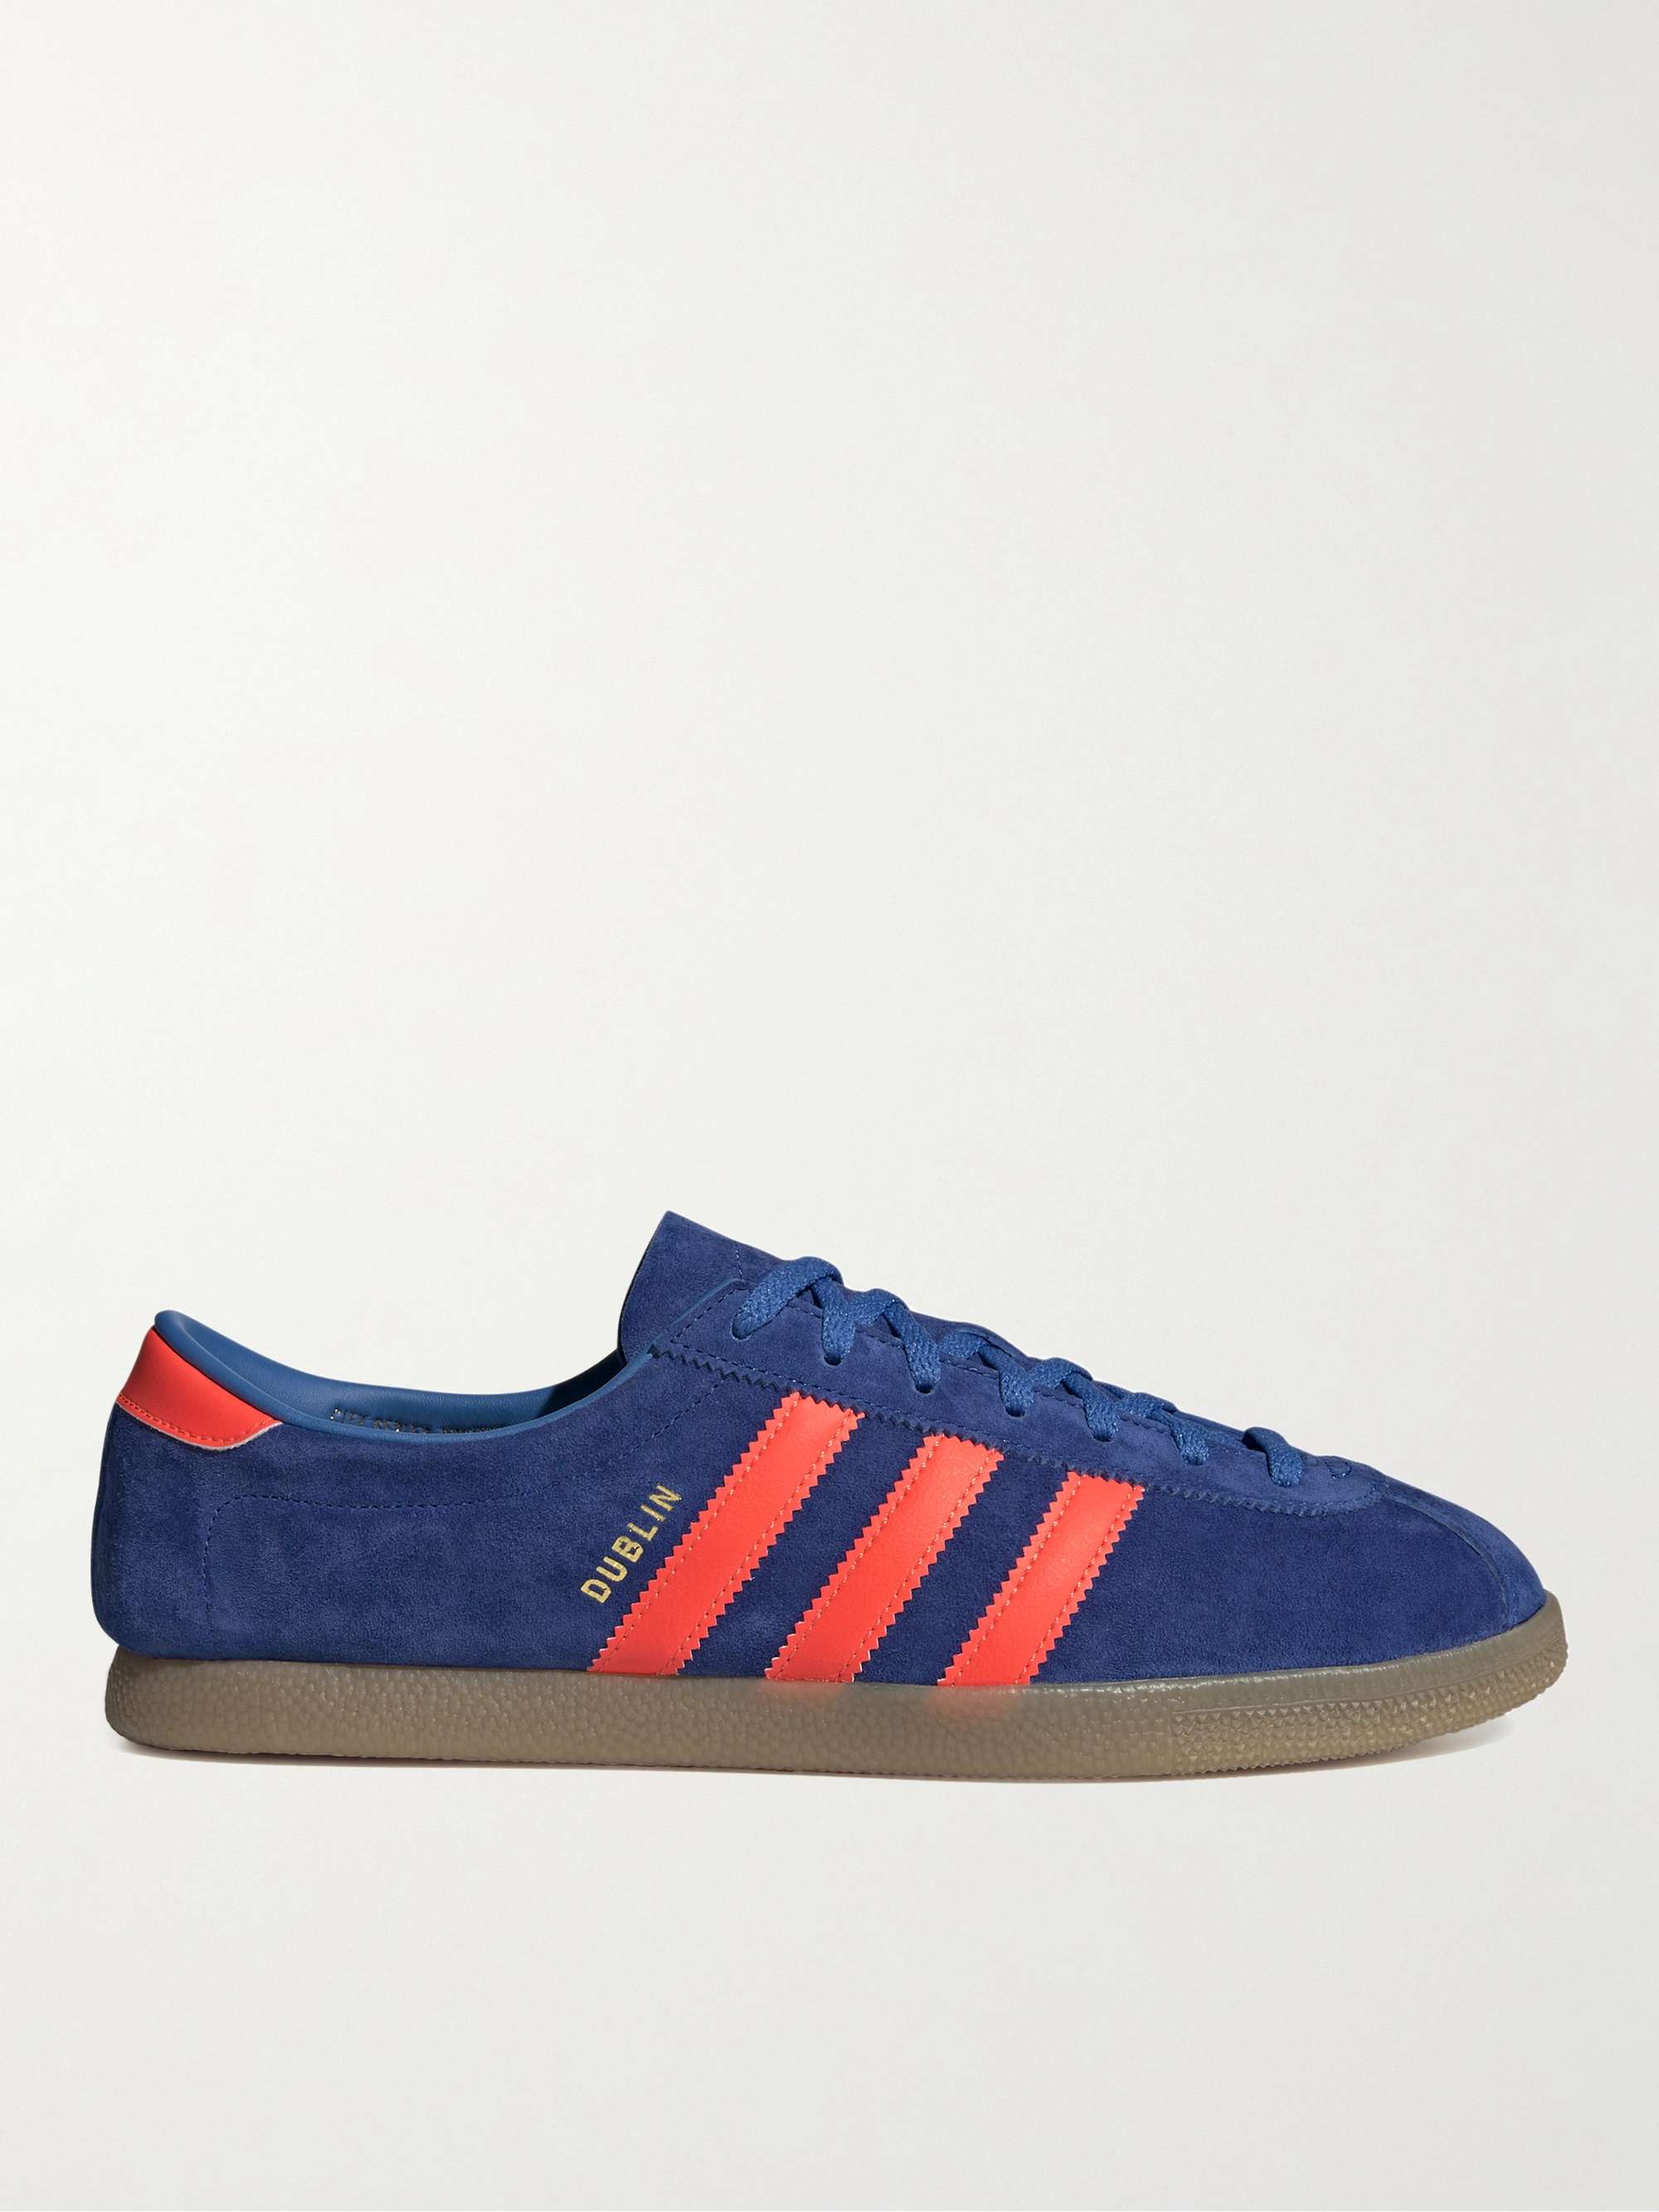 ADIDAS ORIGINALS Dublin Leather-Trimmed Suede Sneakers | MR PORTER